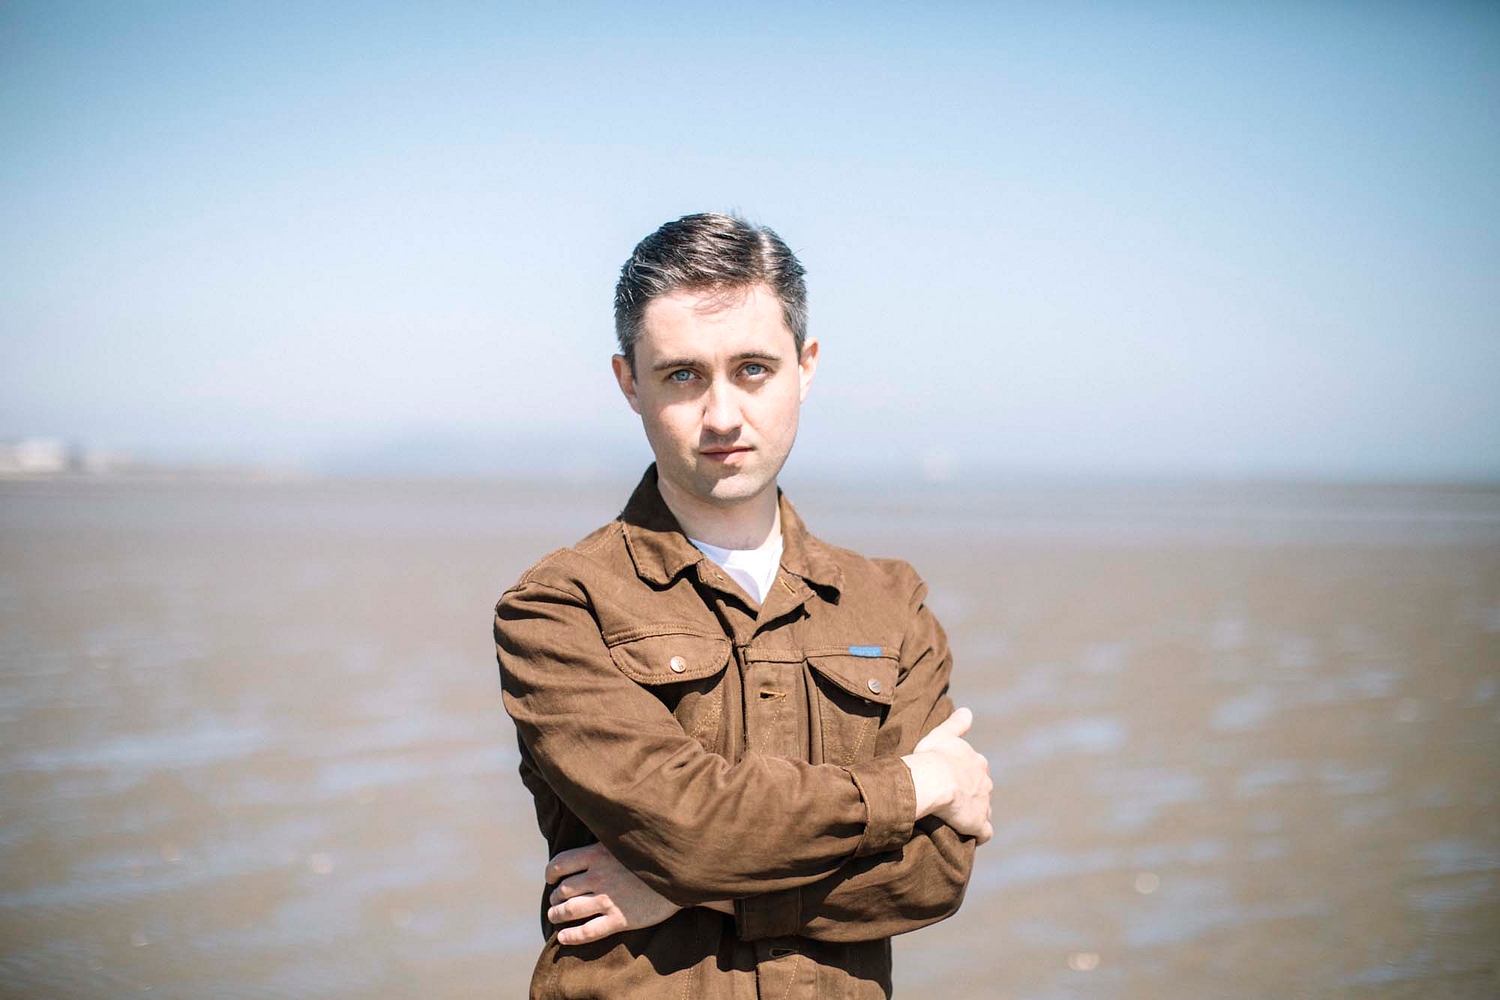 Villagers share new track ‘Again’ and announce 2019 tour